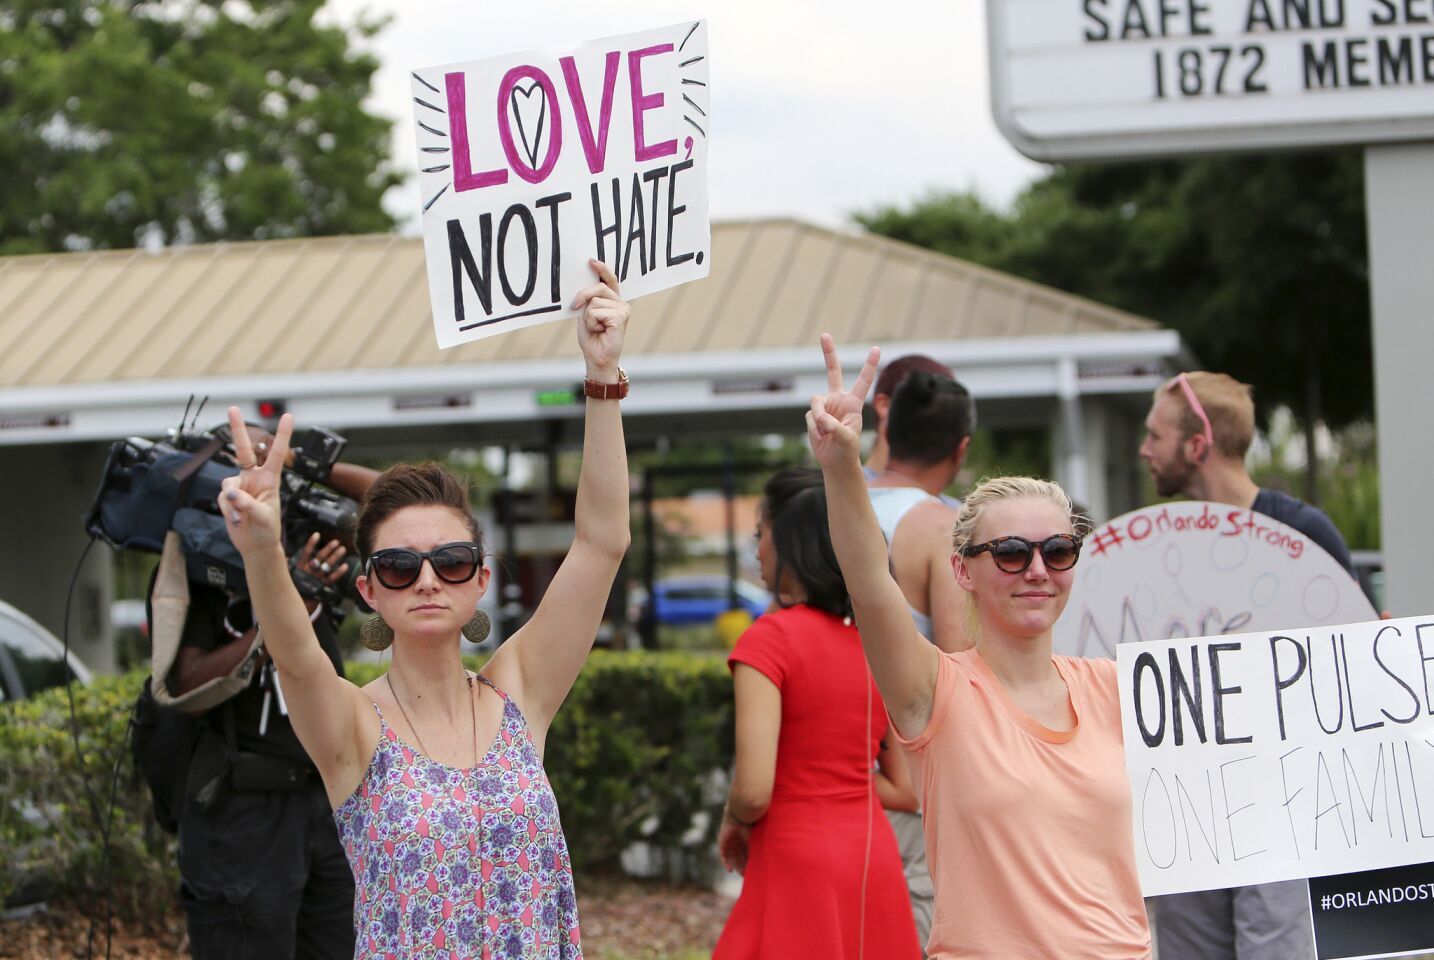 People hold signs in support of the Orlando shooting victims on Sunday.